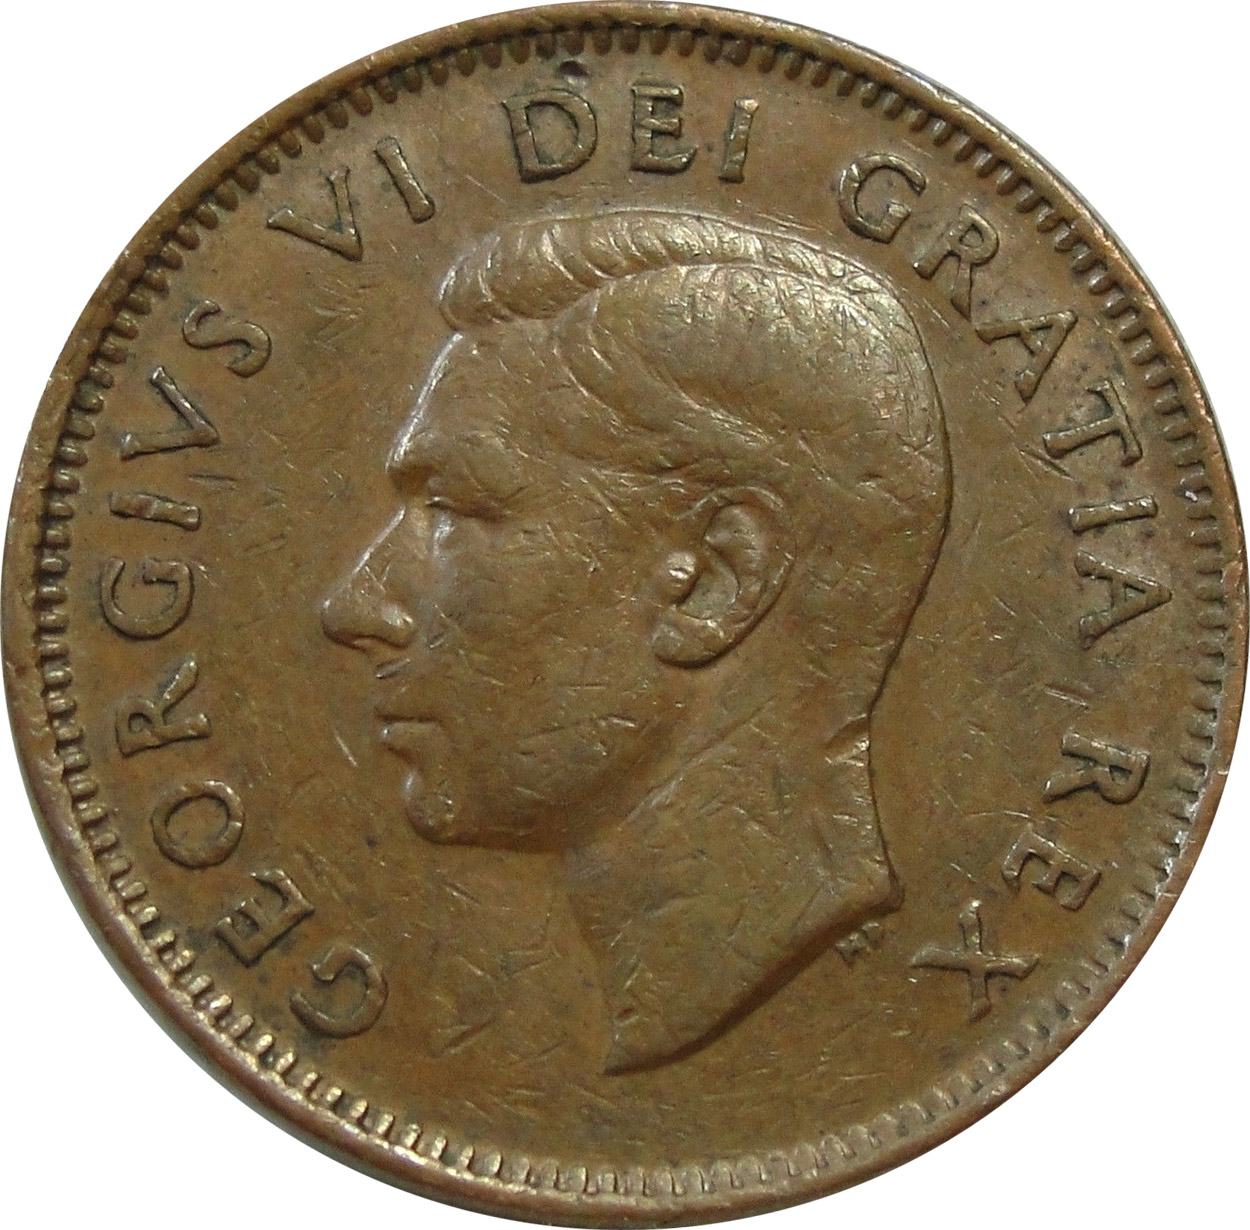 VF-20 - 1 cent 1937 to 1952 - George VI